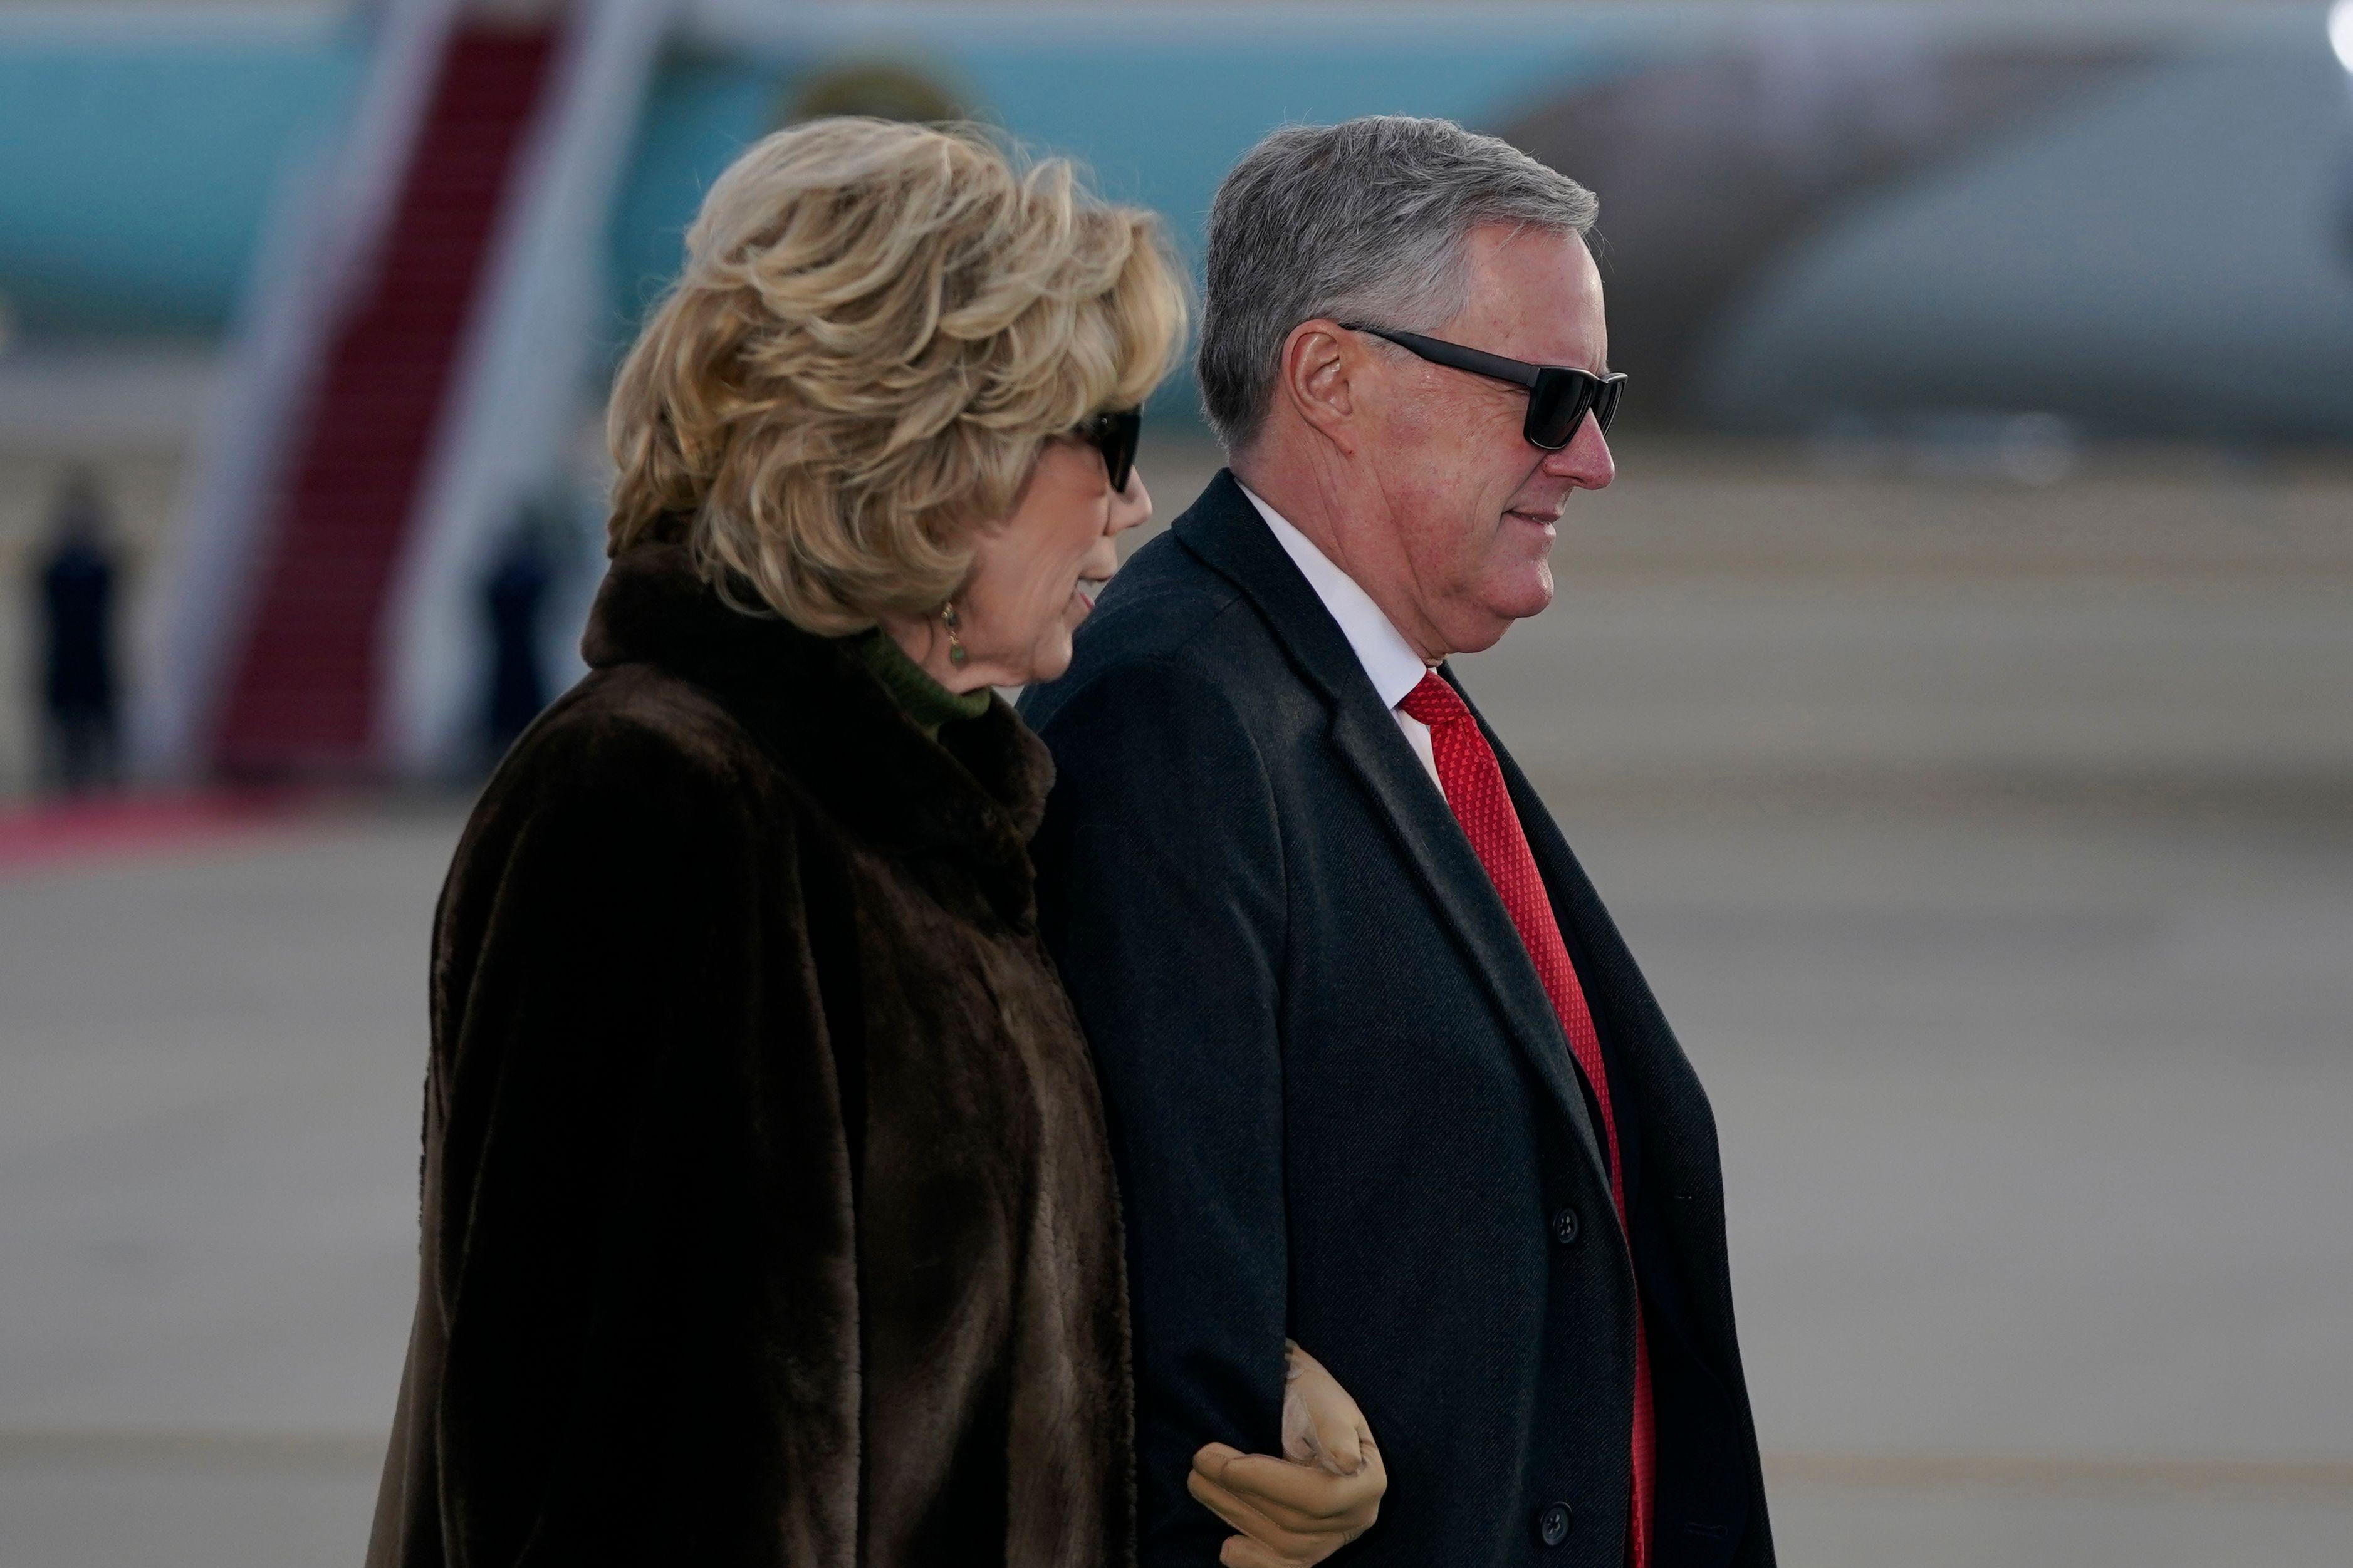 Mark Meadows in a suit and Debbie Meadows in a fur coat, both wearing sunglasses and walking